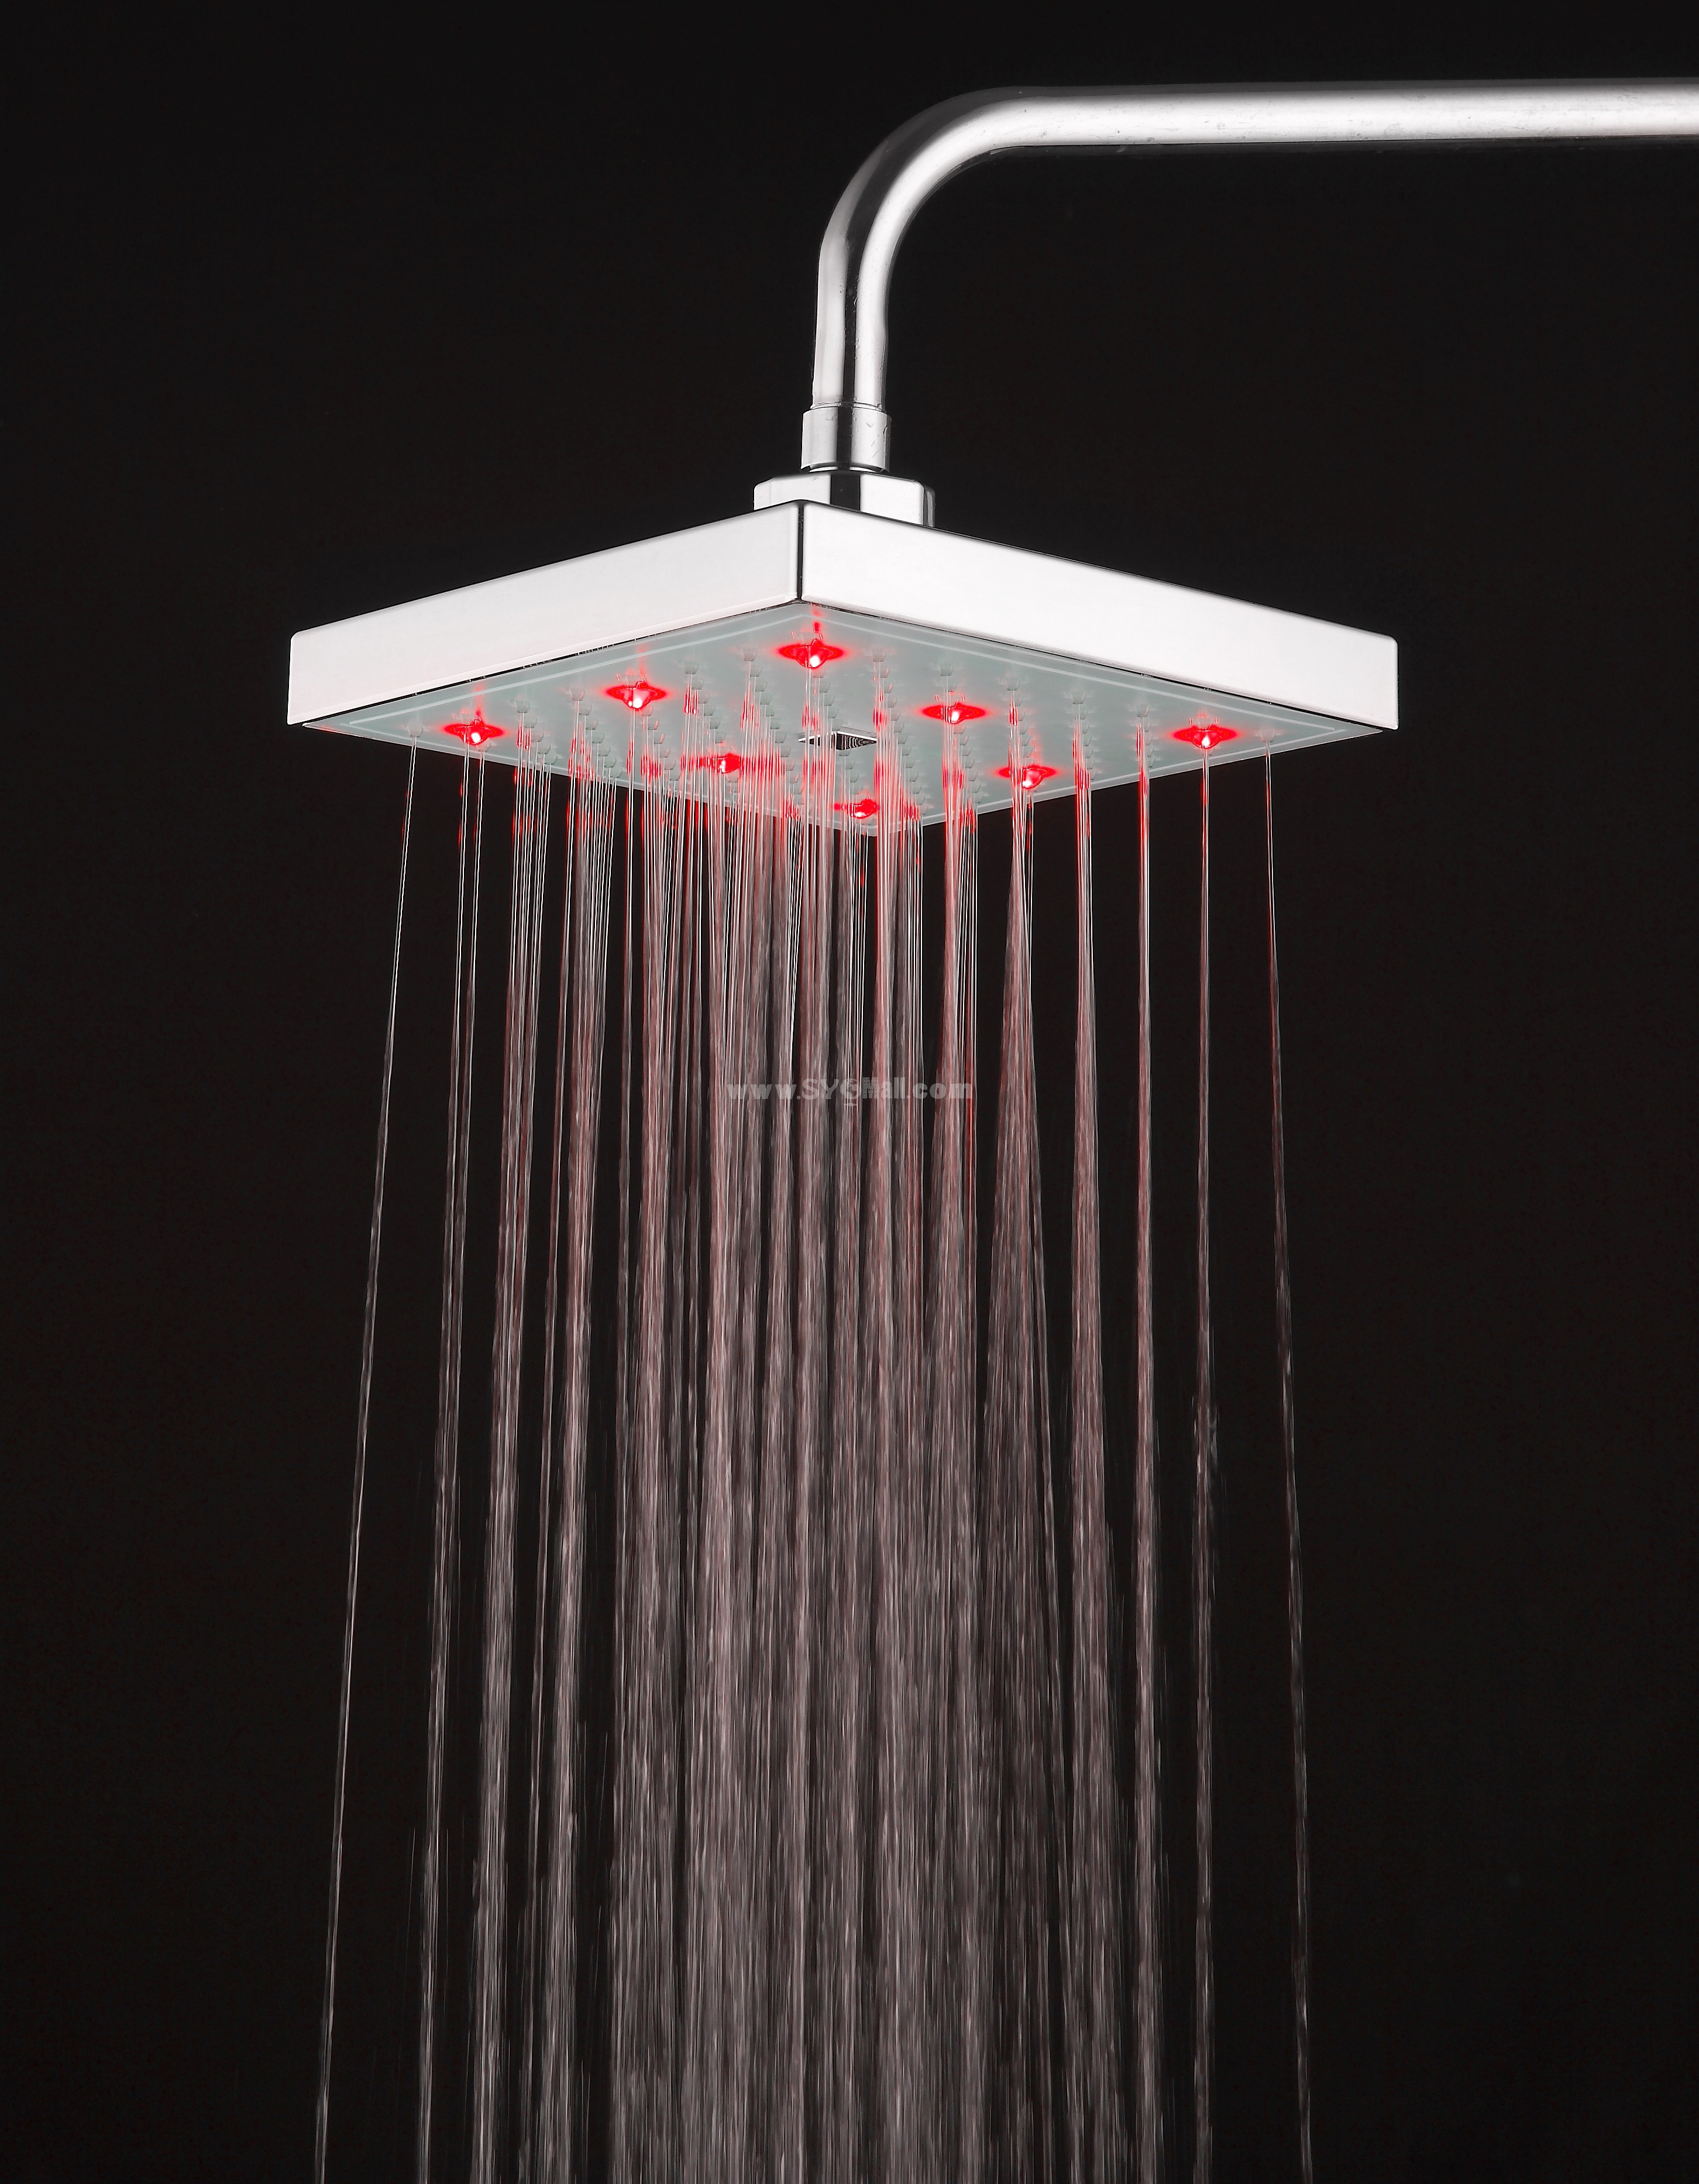 Romantic Bright Color LED Lights Top Spray Shower Bathroom Showerhead HY-3001W (Temperature Control Changing Color)